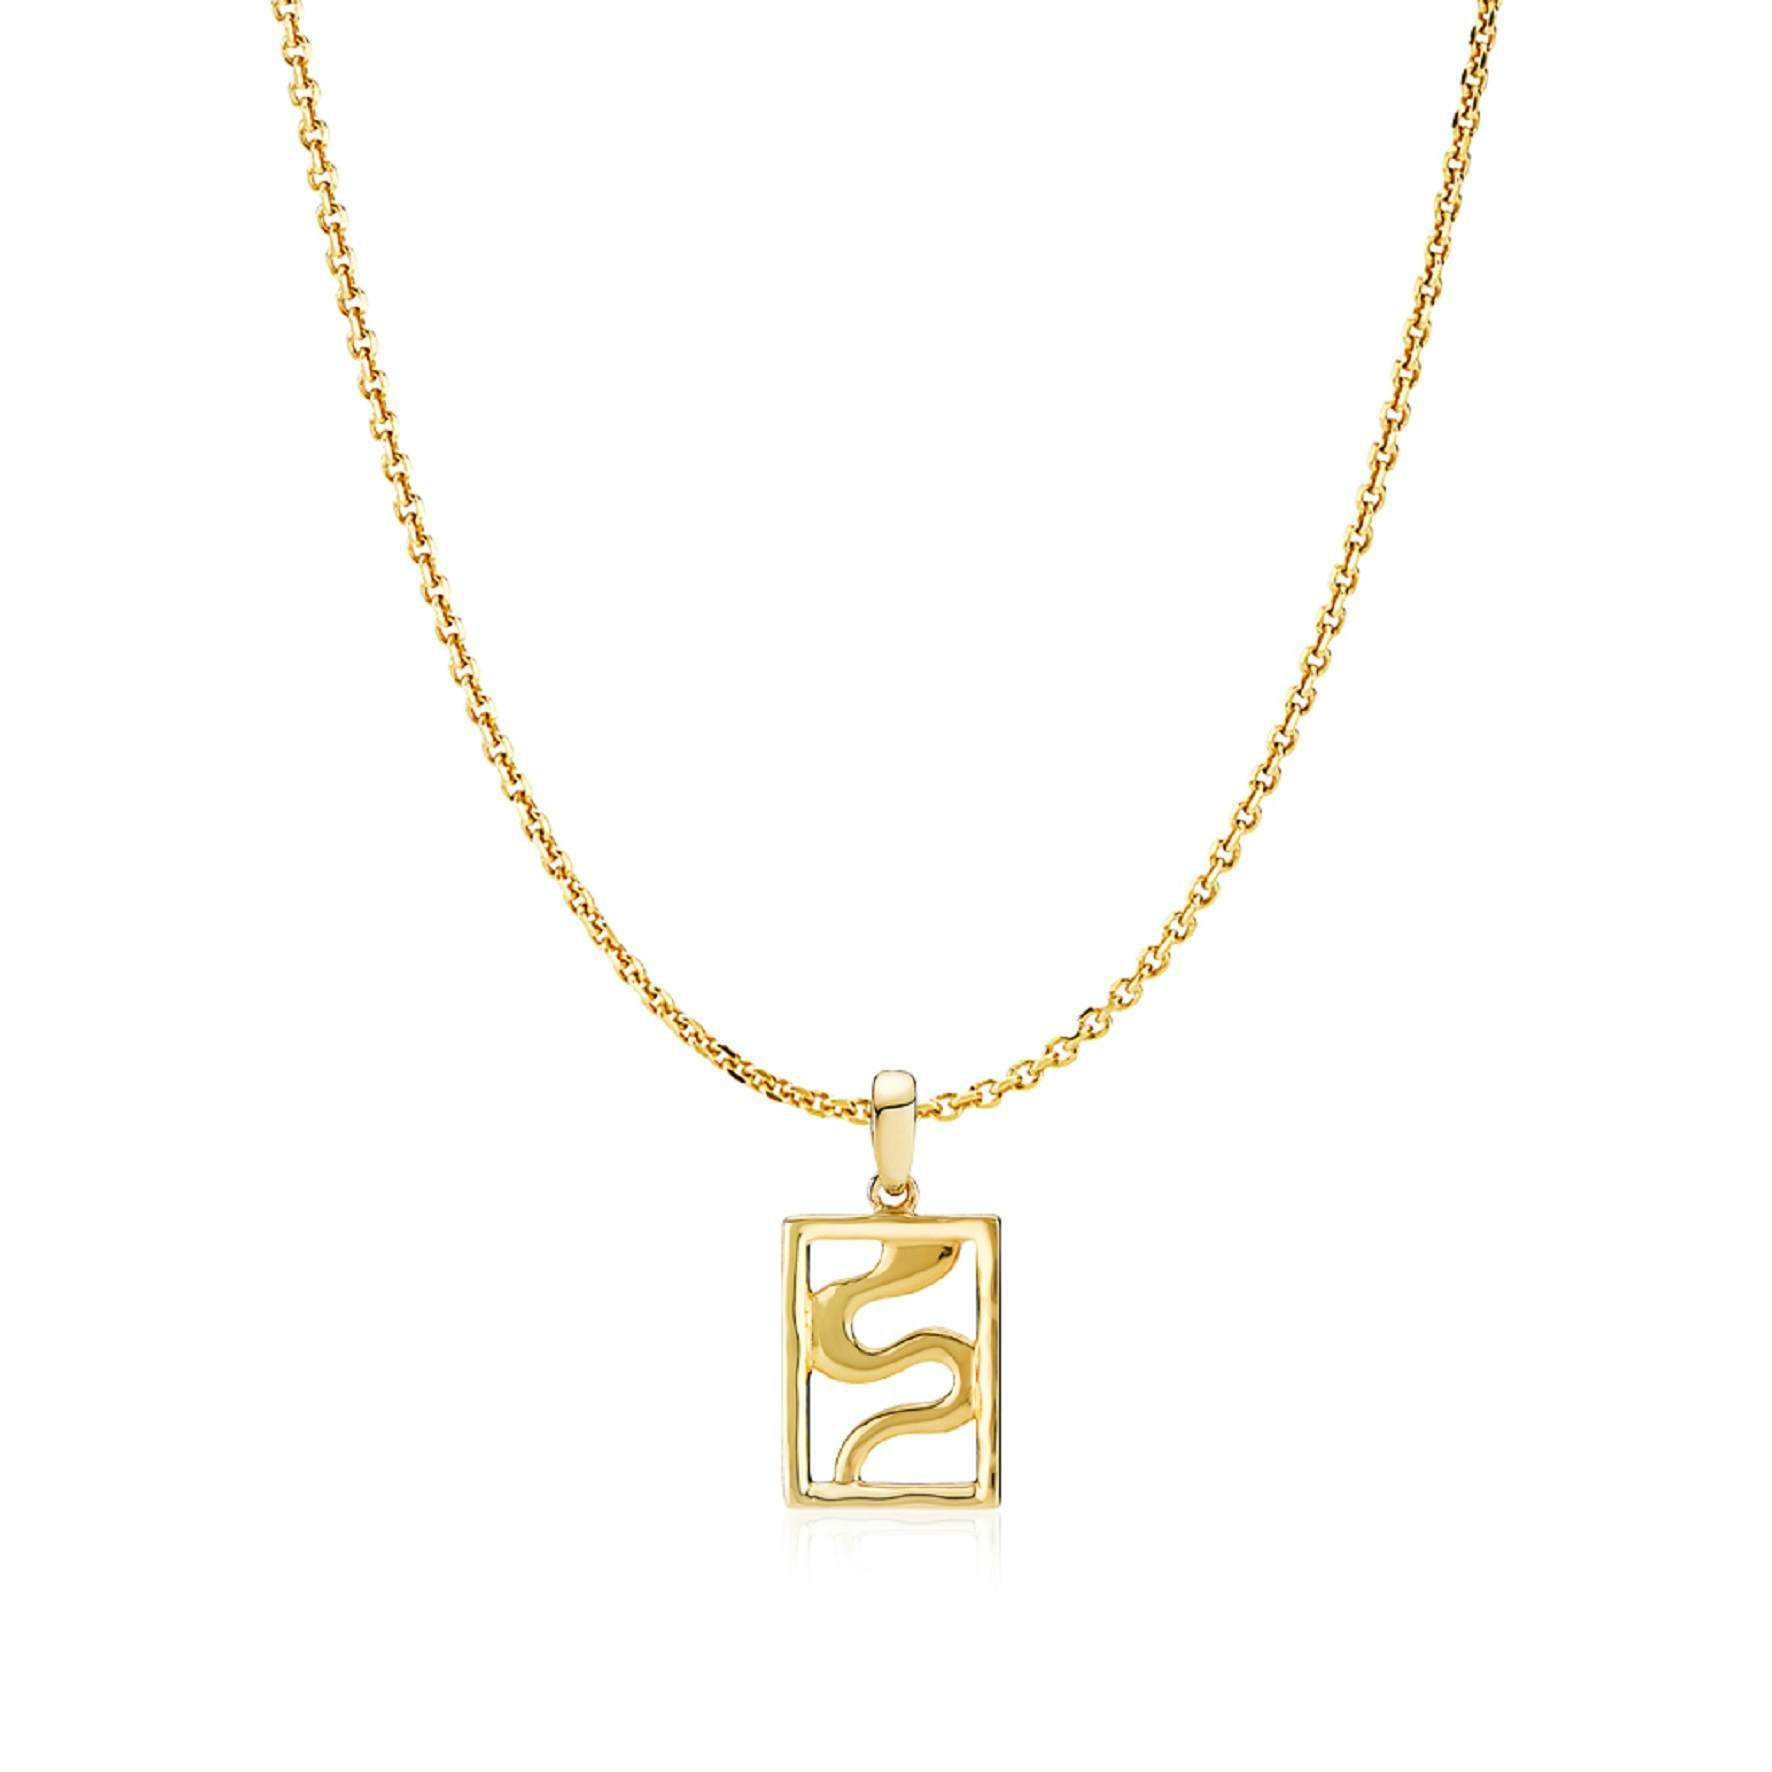 Kathrine Fisker by Sistie Necklace from Sistie in Goldplated-Silver Sterling 925|Blank